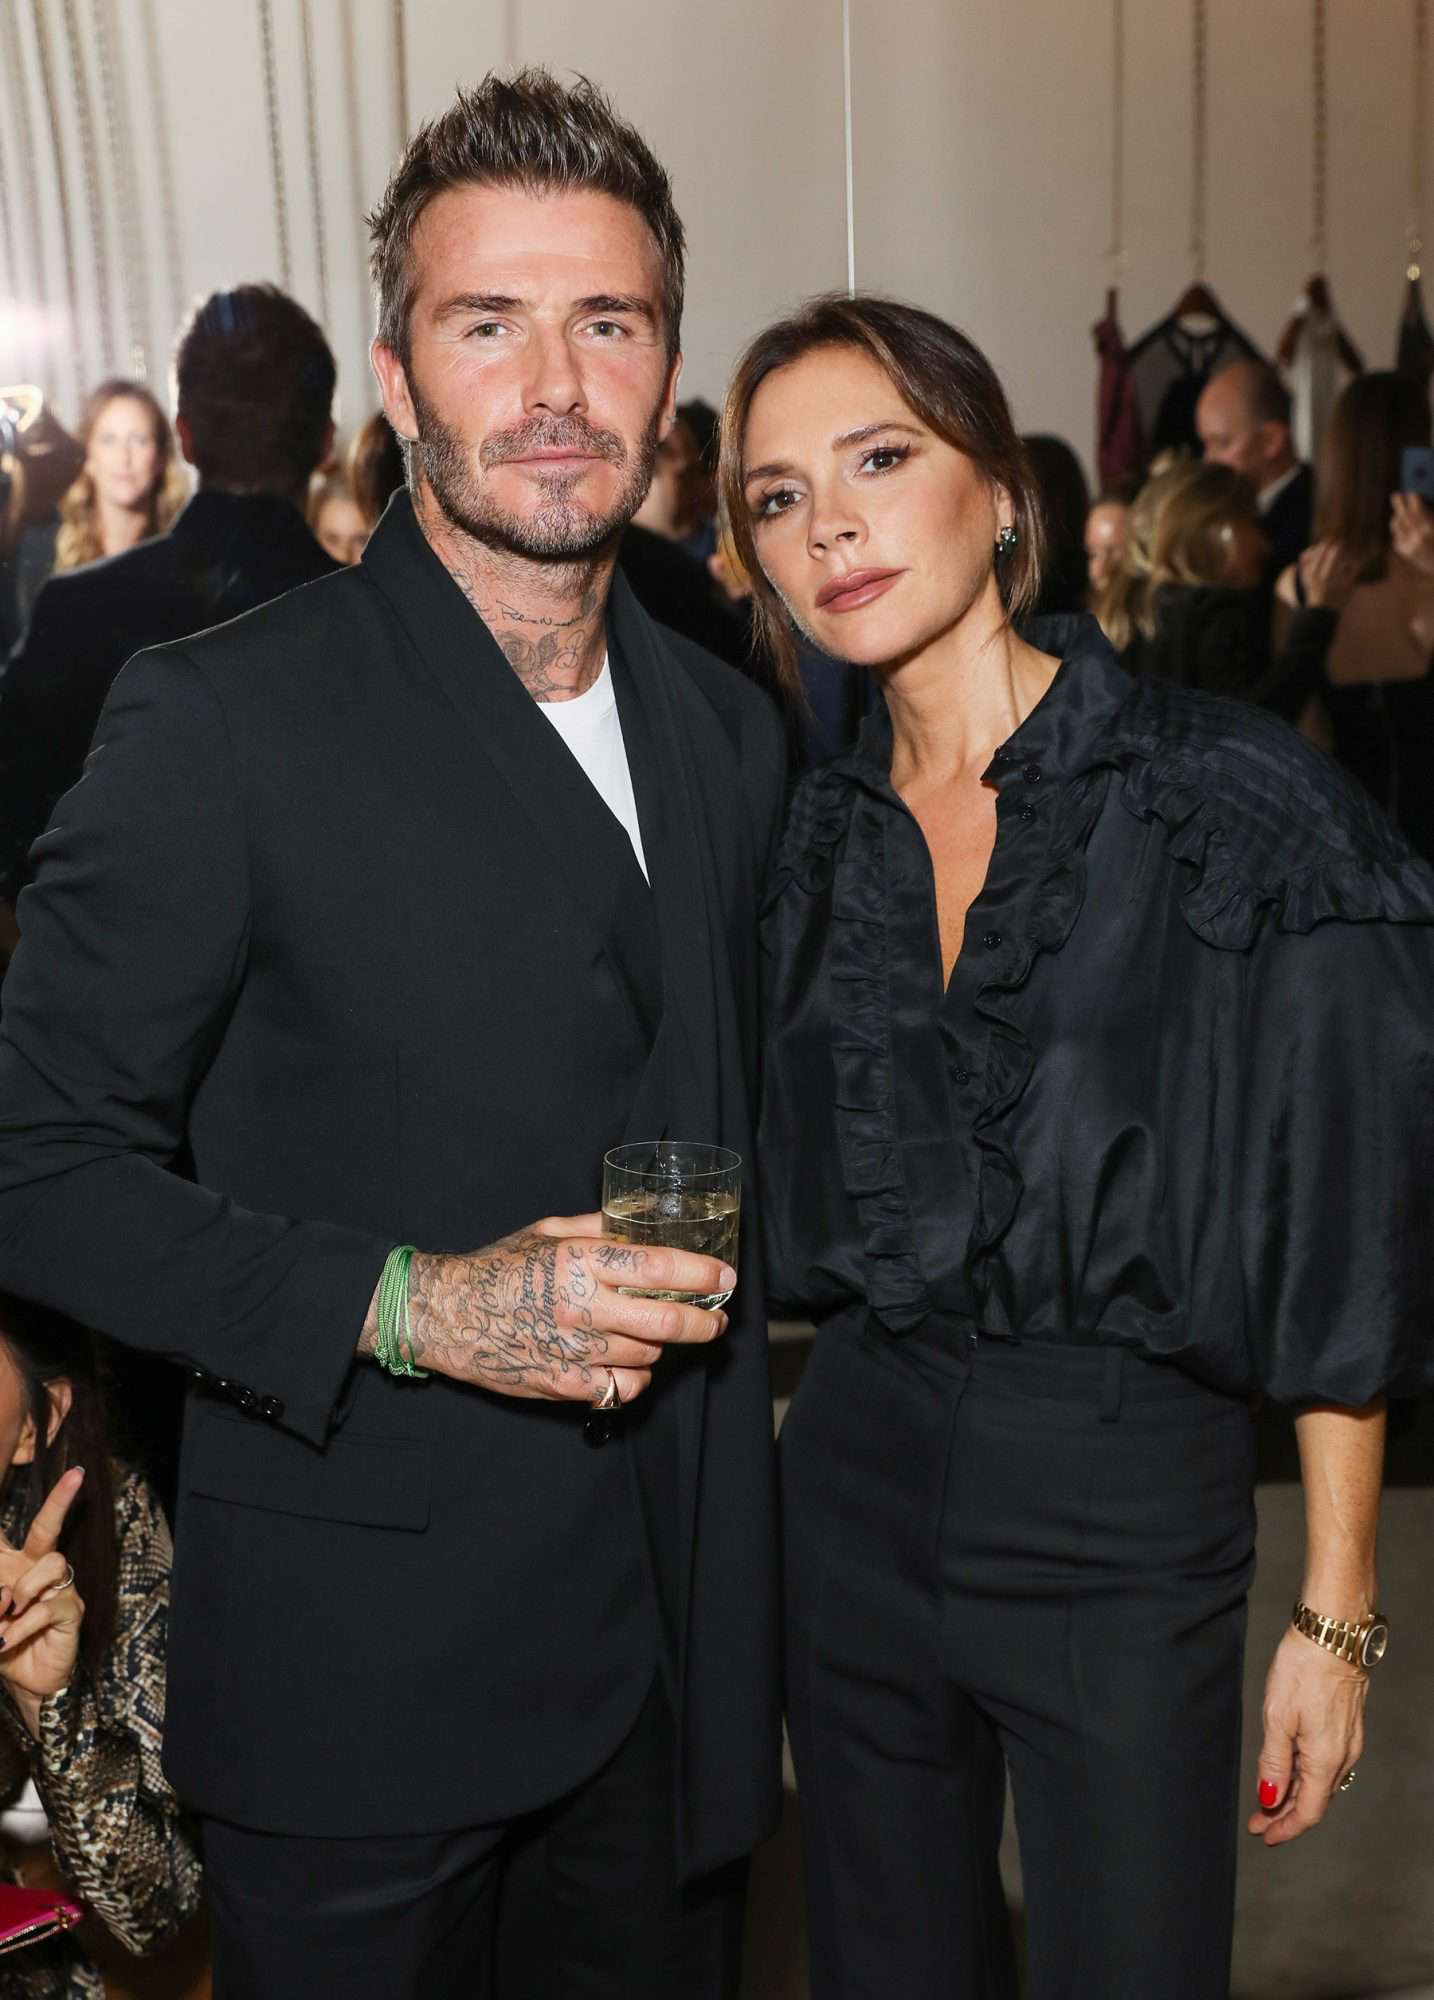 Victoria Beckham Was Inspired By Husband David Beckham for Latest Collection | PEOPLE.com